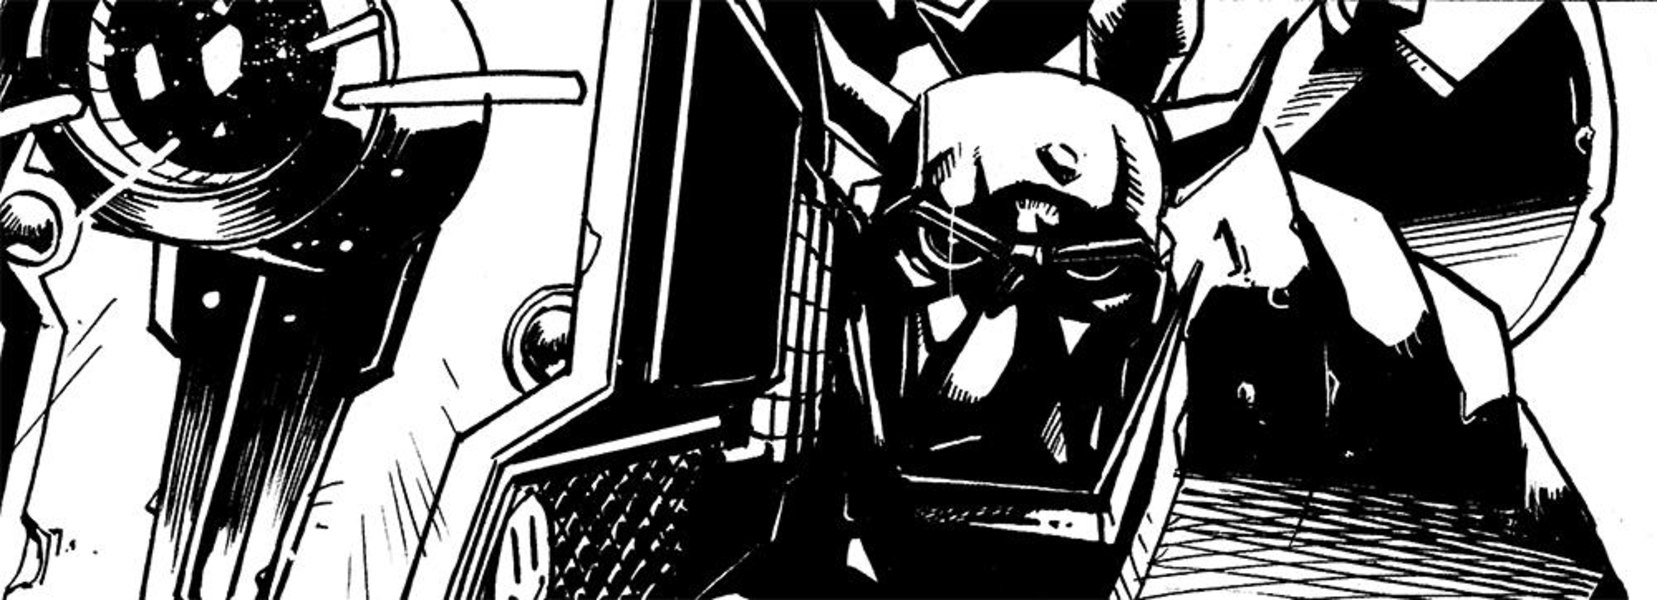 DEATHS HEAD RETURNS   IDW Transformers Artist Kei Zama To Draw New Marvel Series Nick Roche To Provide Covers  (3 of 4)